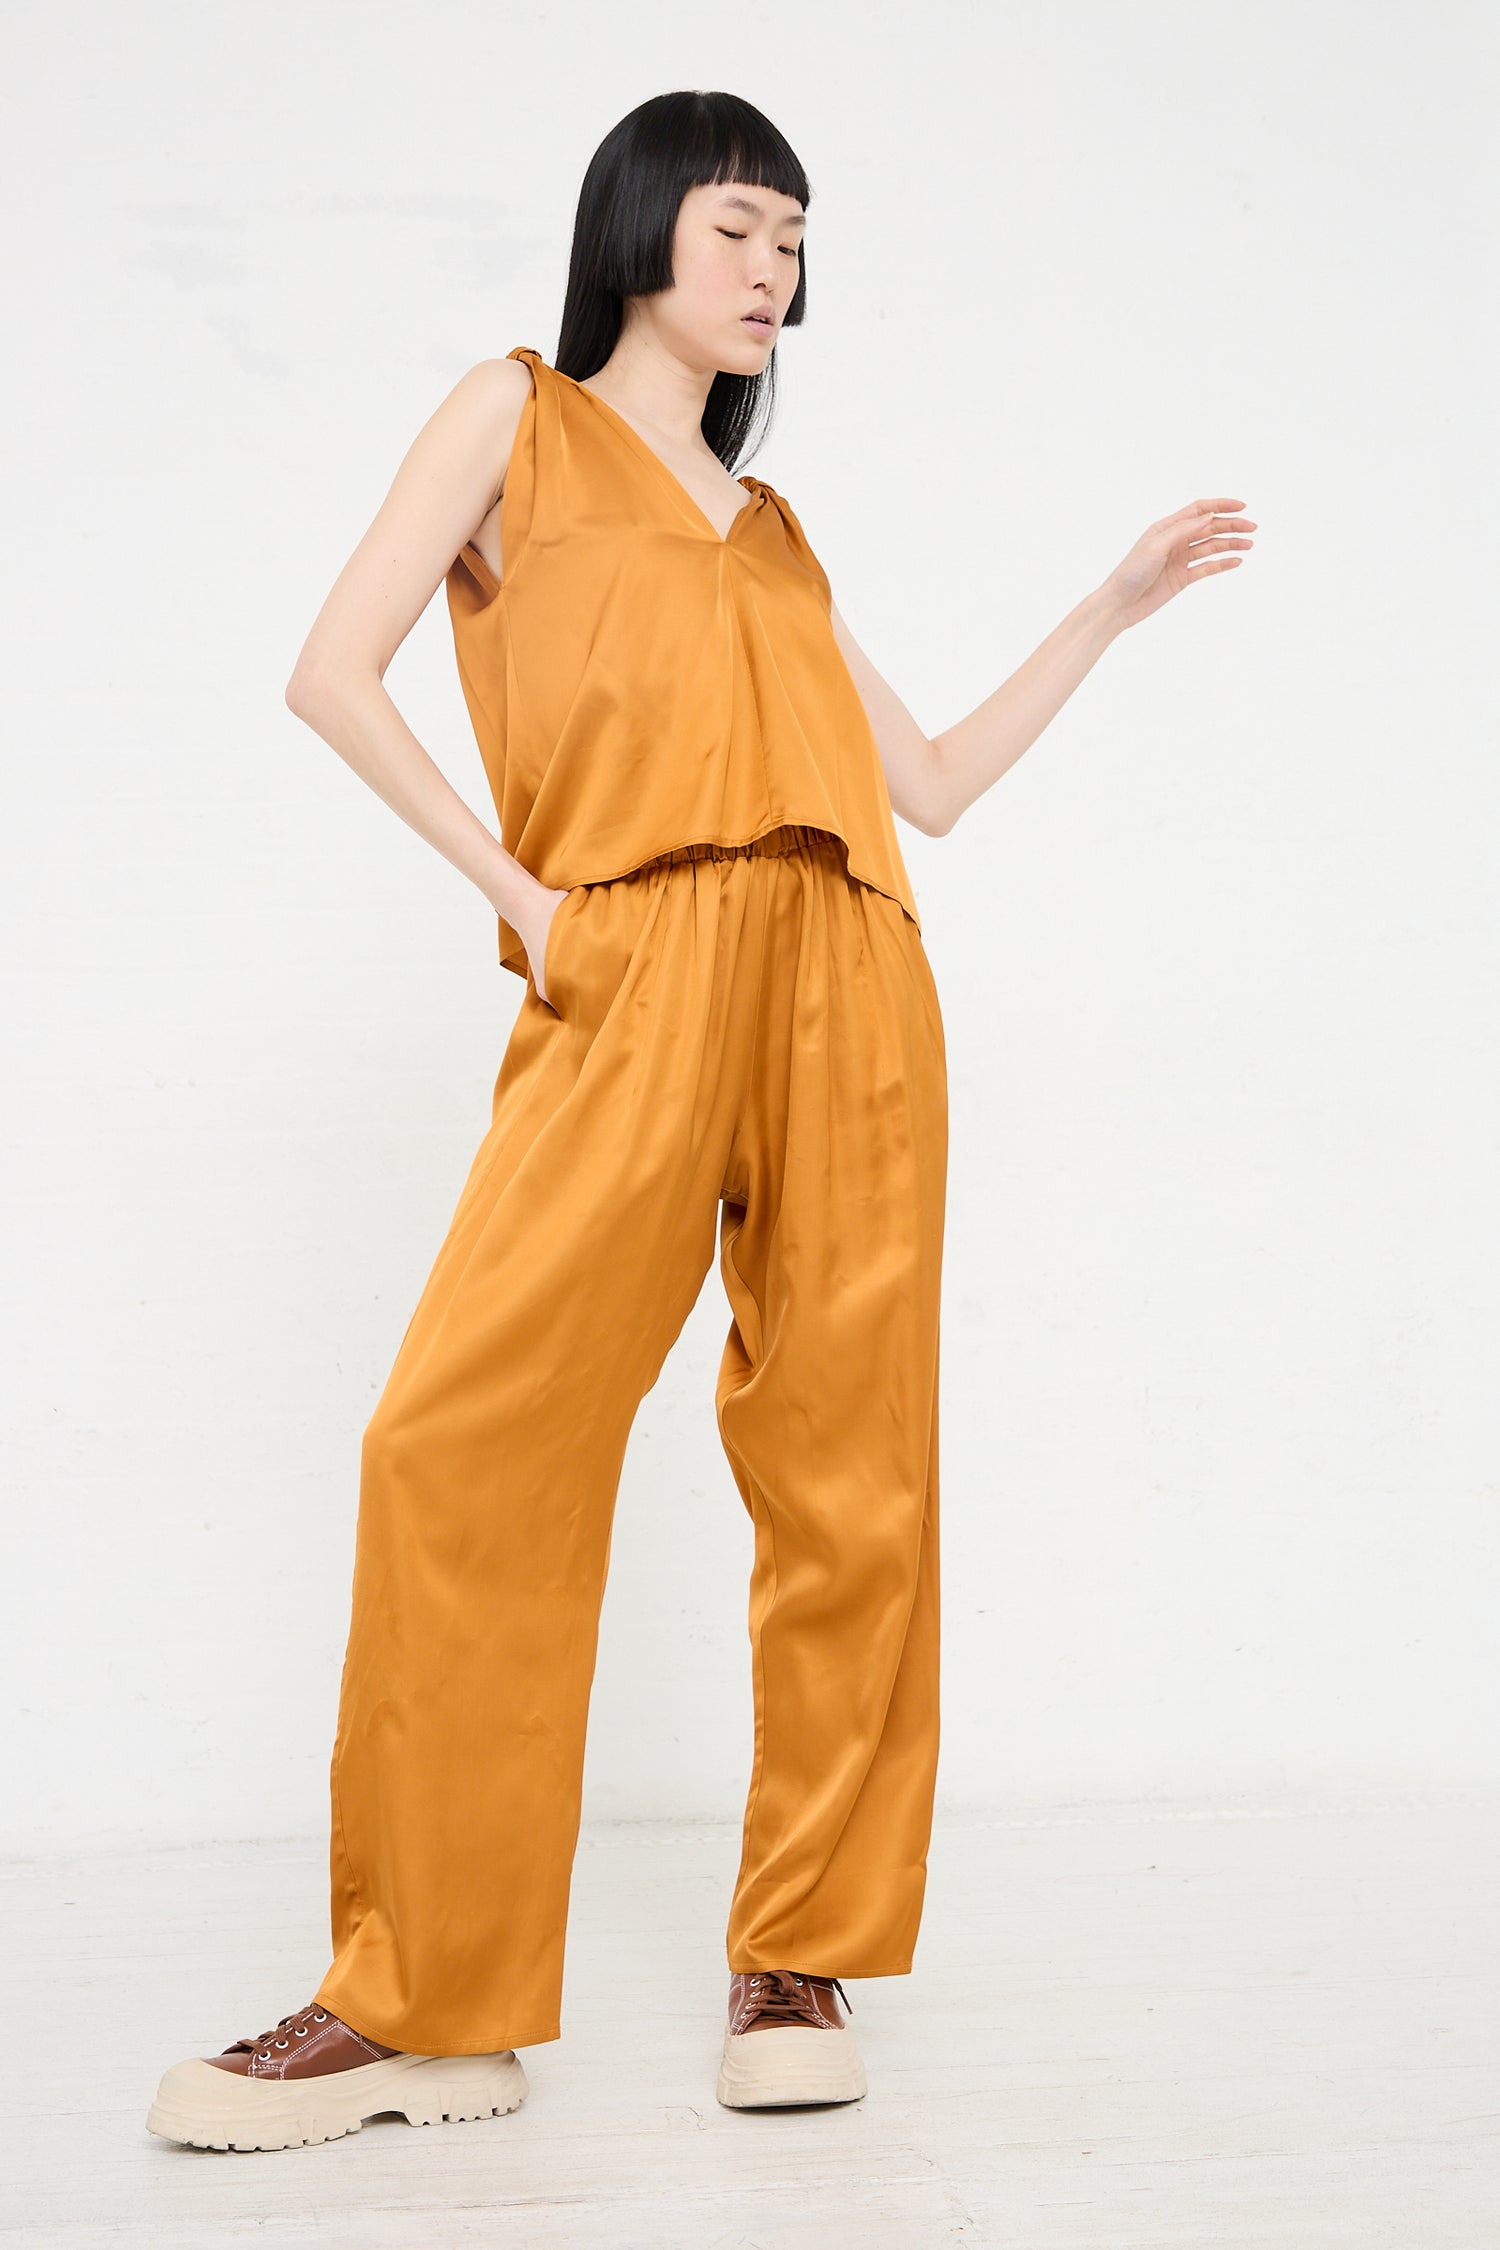 A person in a Neil Top in Mina Copper by Baserange and brown shoes posing with one hand raised against a plain backdrop.